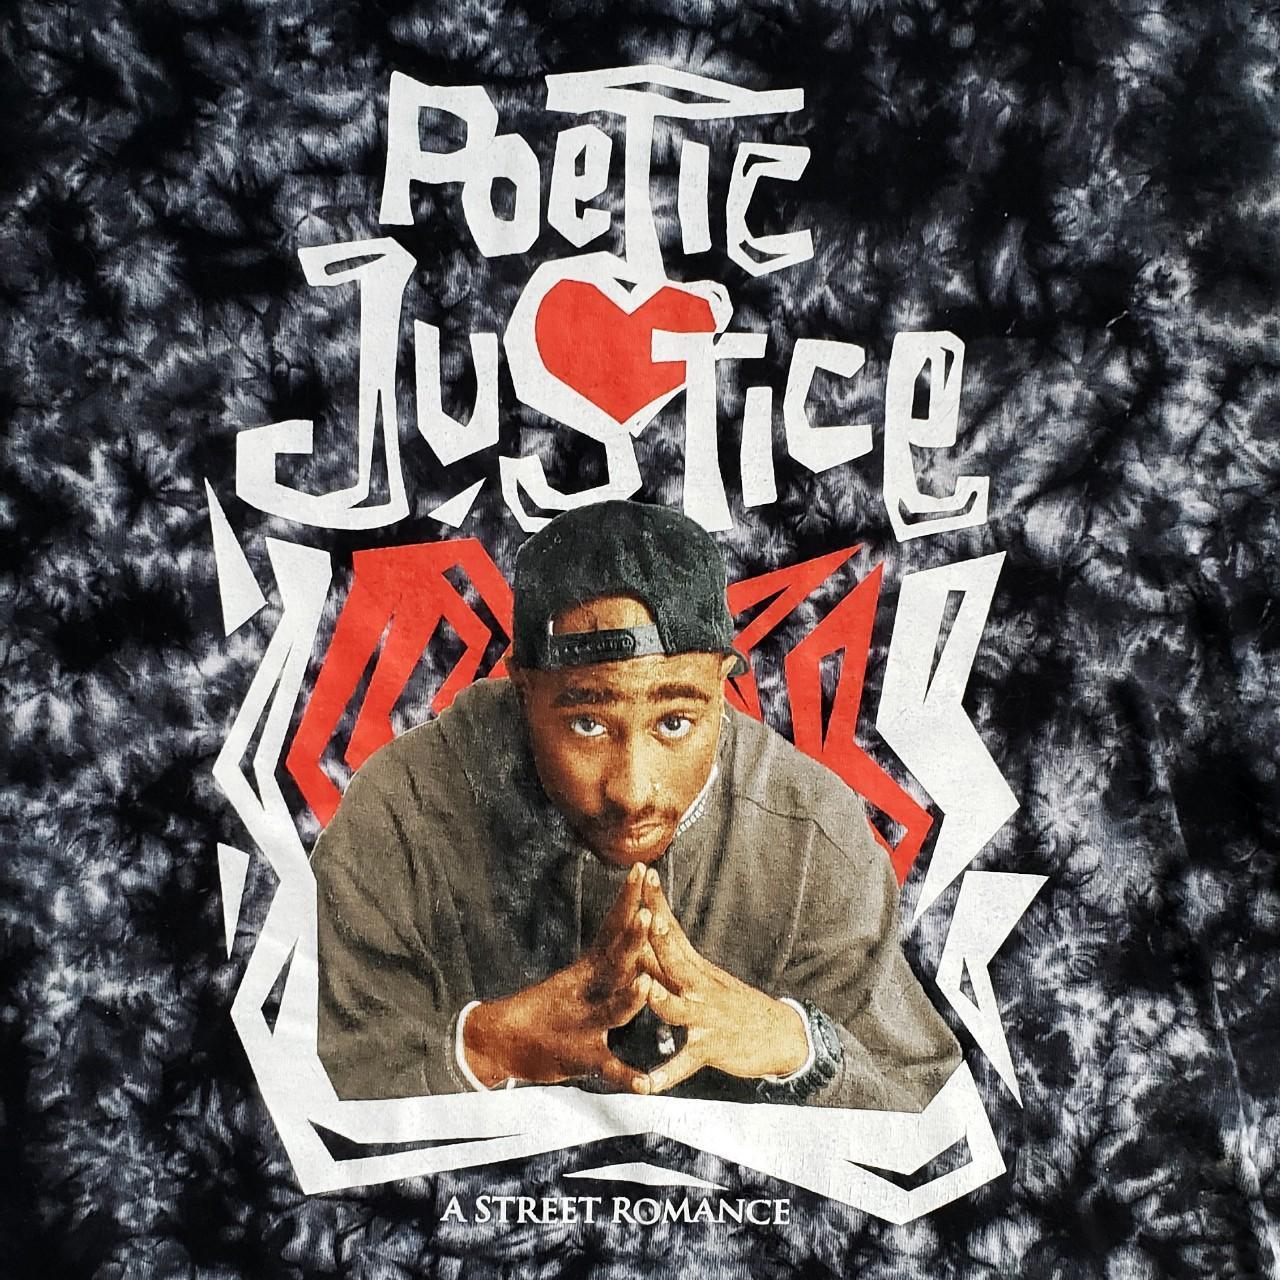 Product Image 1 - Poetic Justice "Tupac" shirt, size